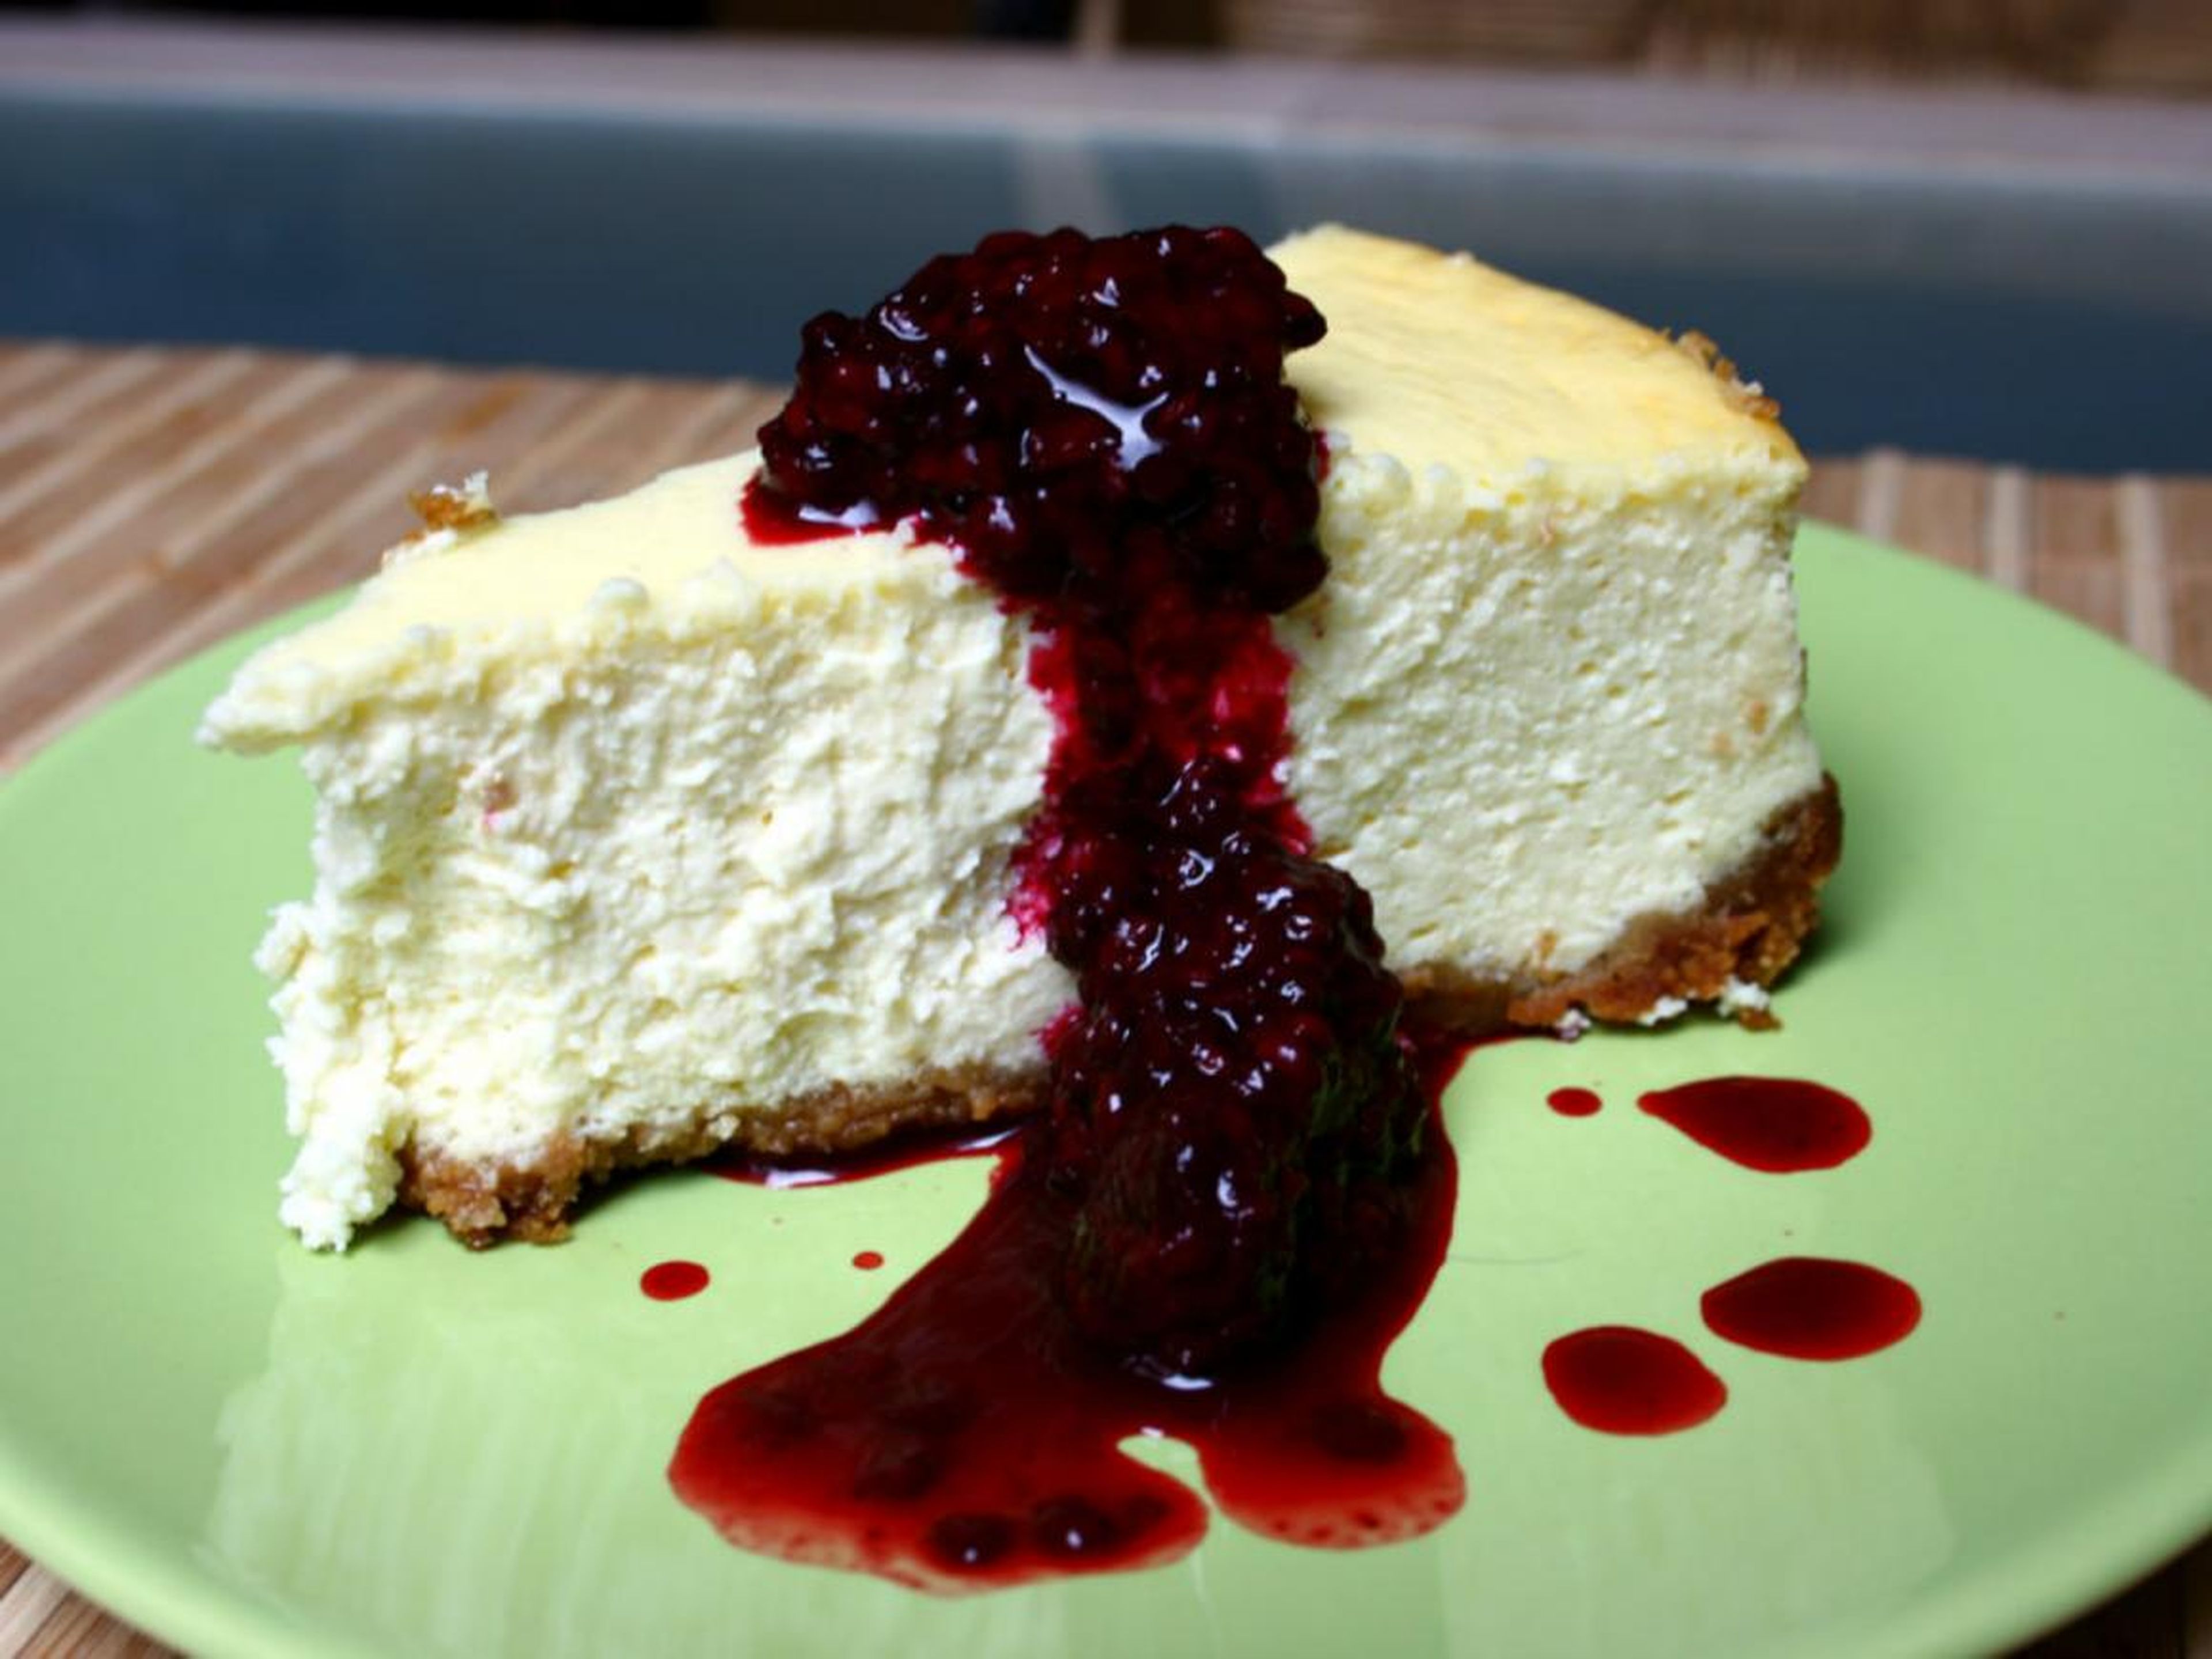 Creamy cheesecake topped with blackberry sauce.